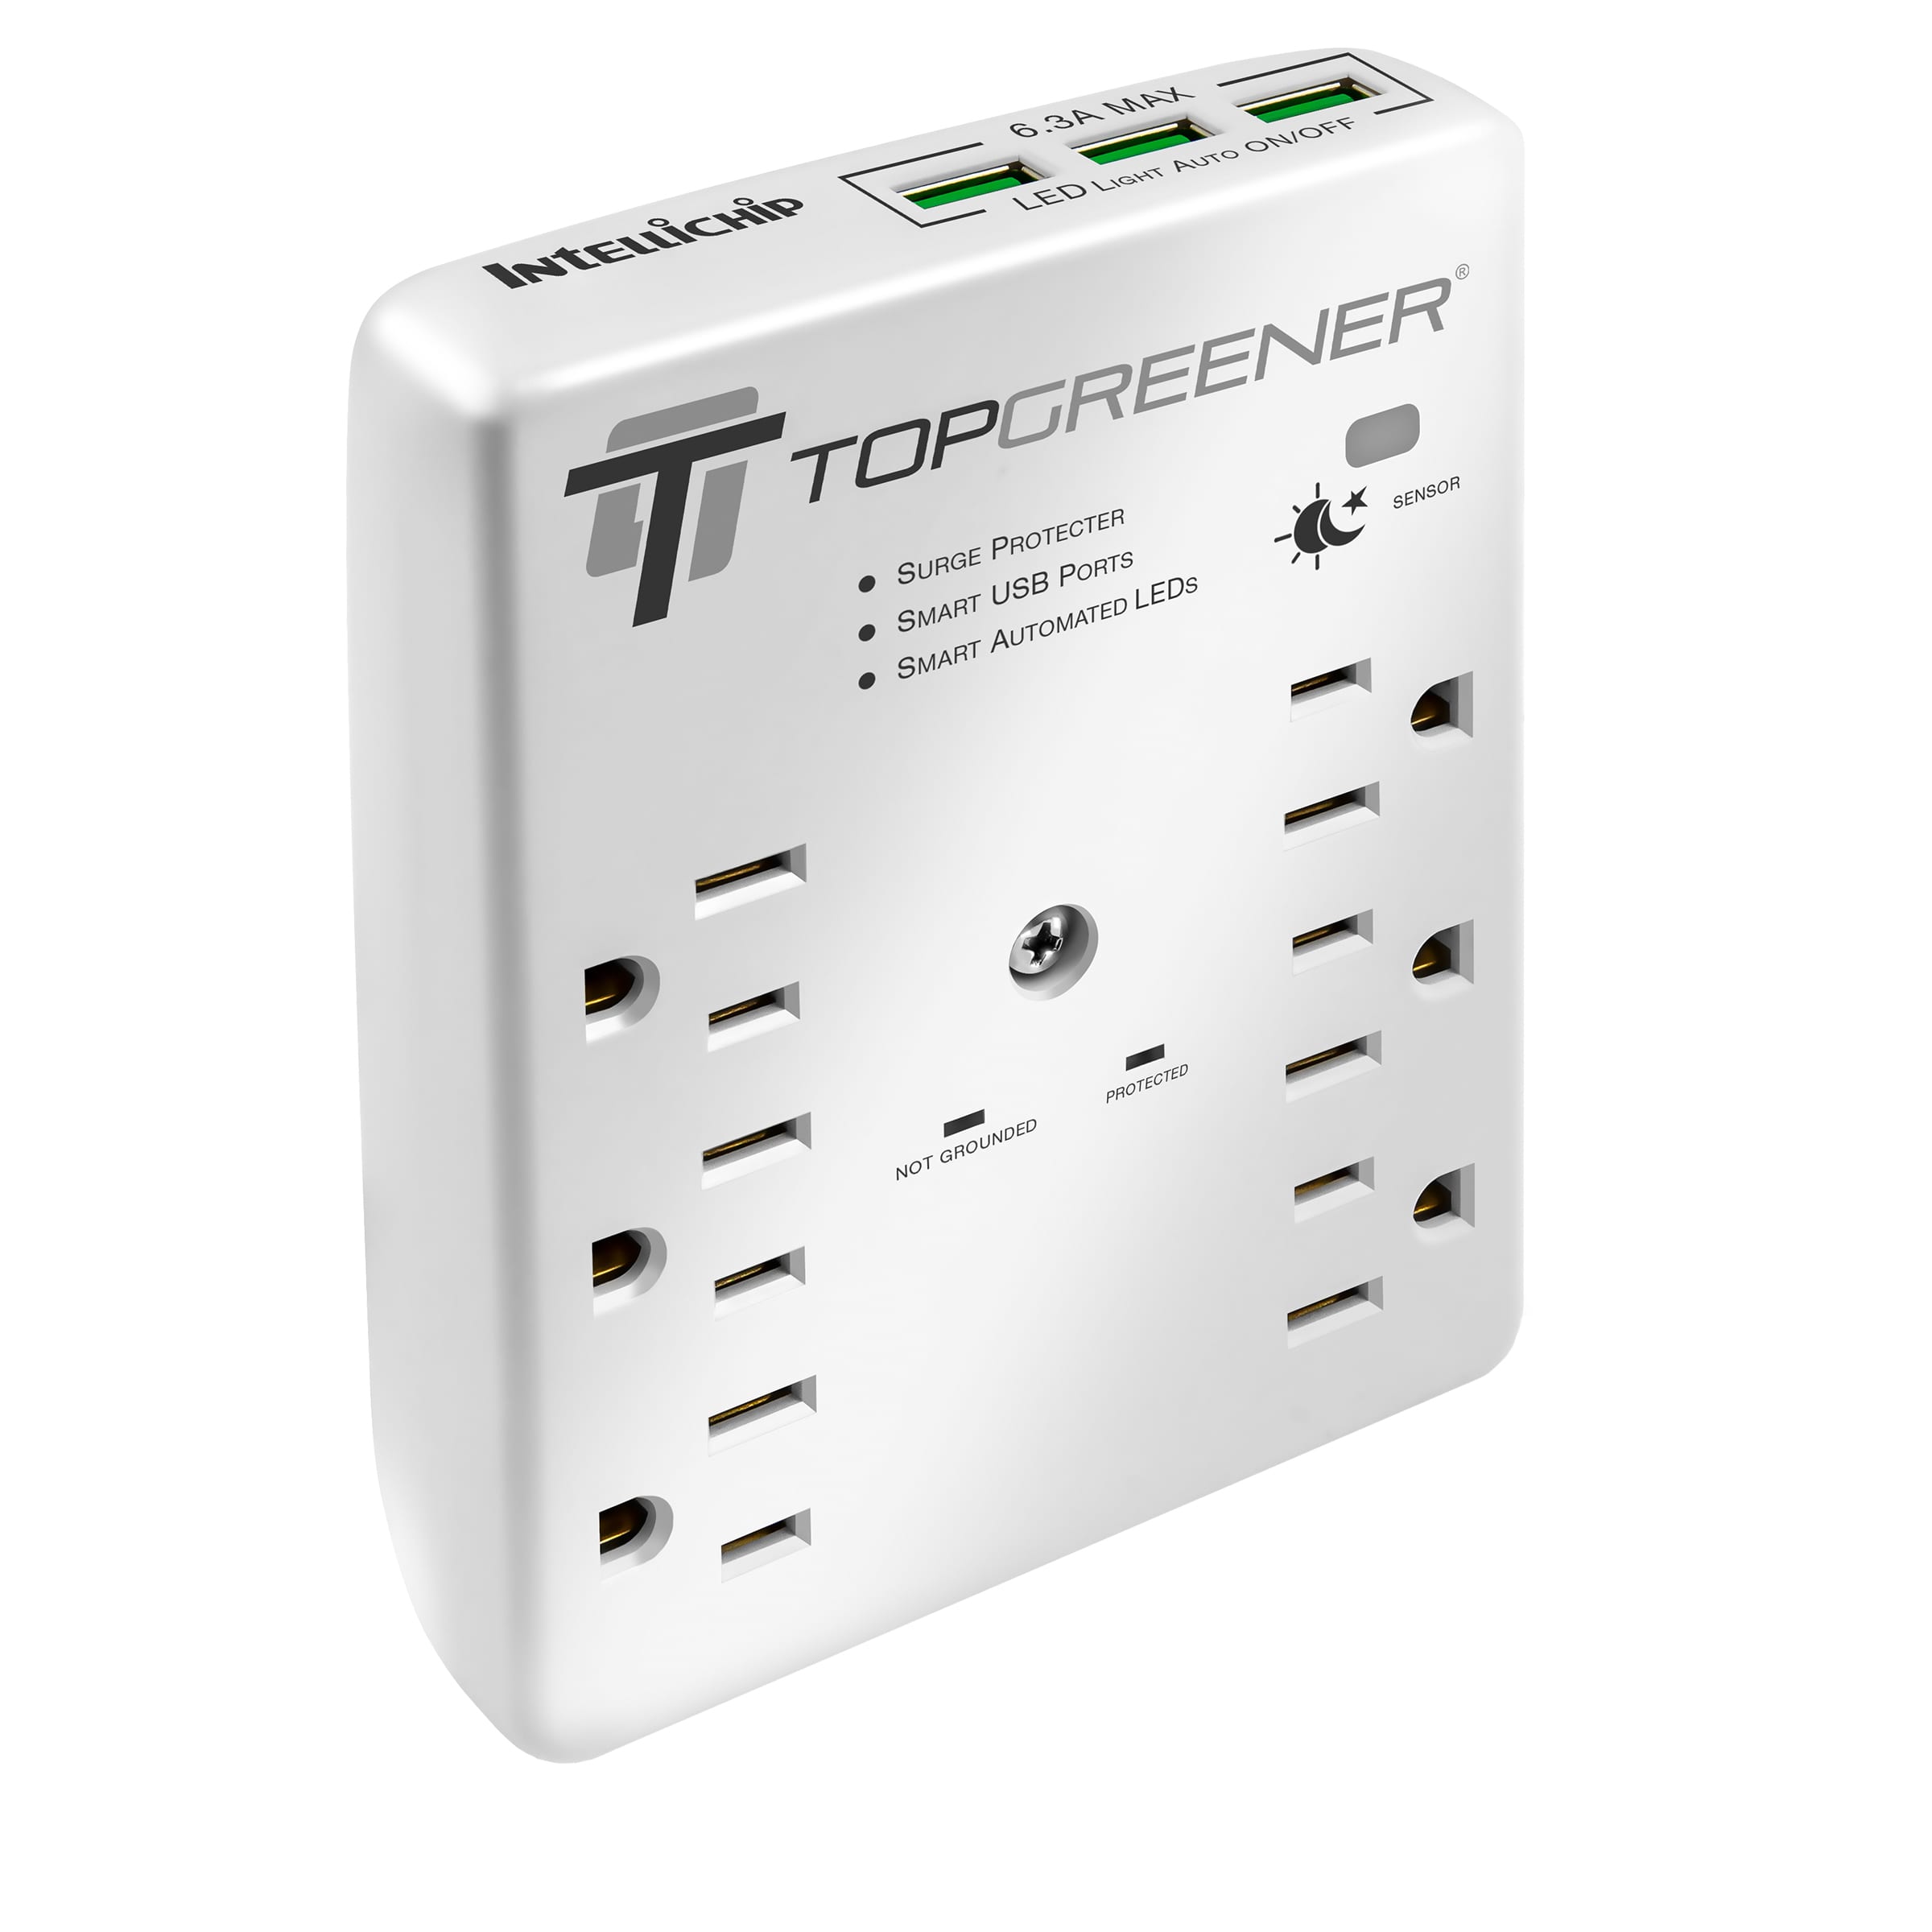 6 Outlet, Triple USB-A Port, Wall Mounted Surge Protector